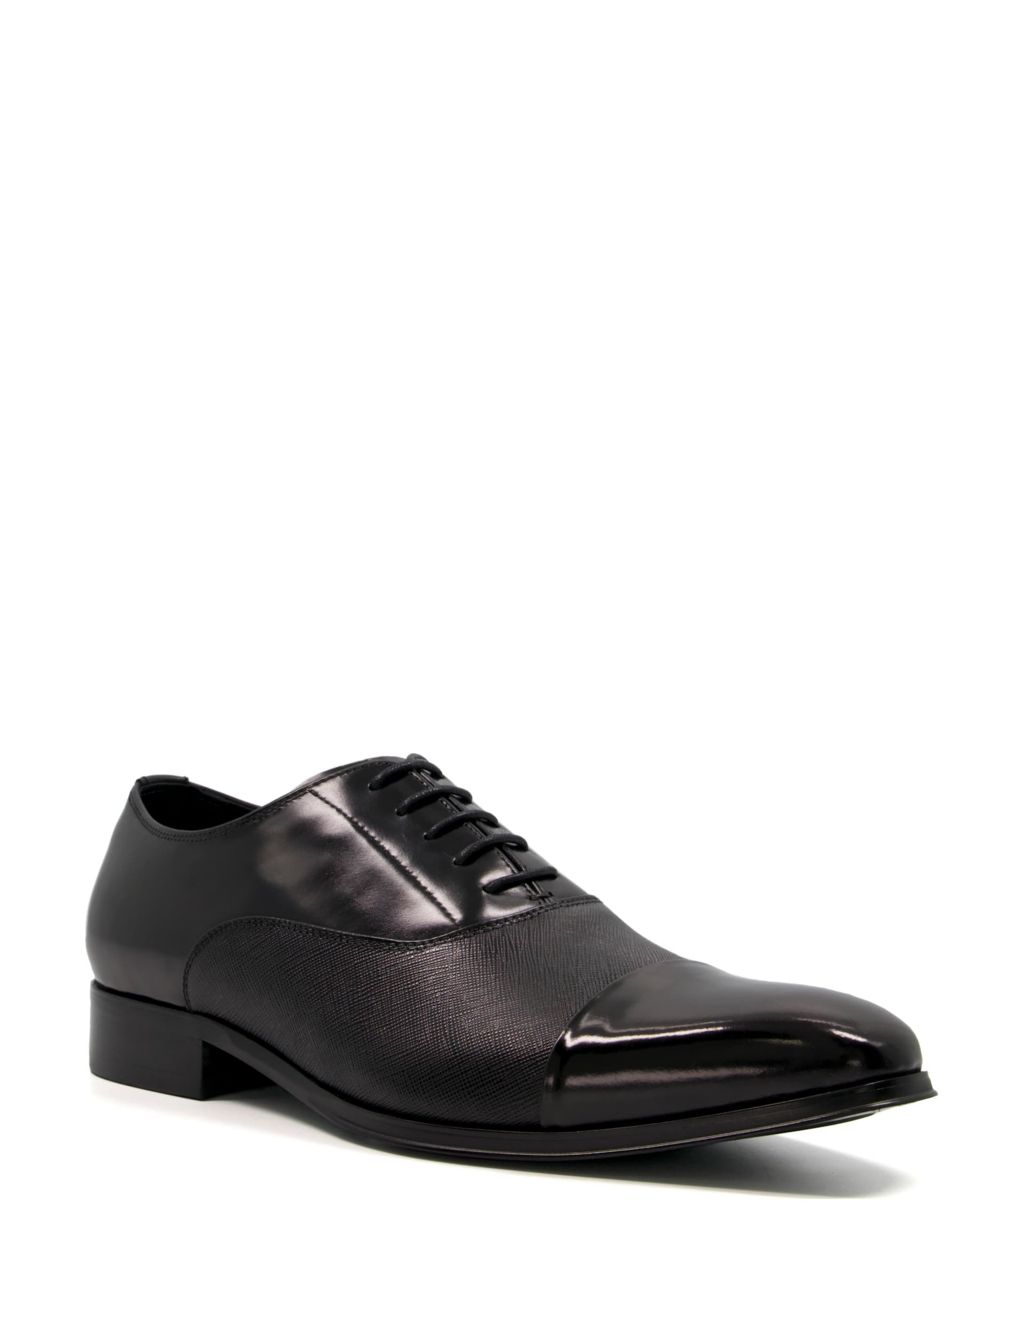 Leather Oxford Shoes | Dune London | M&S